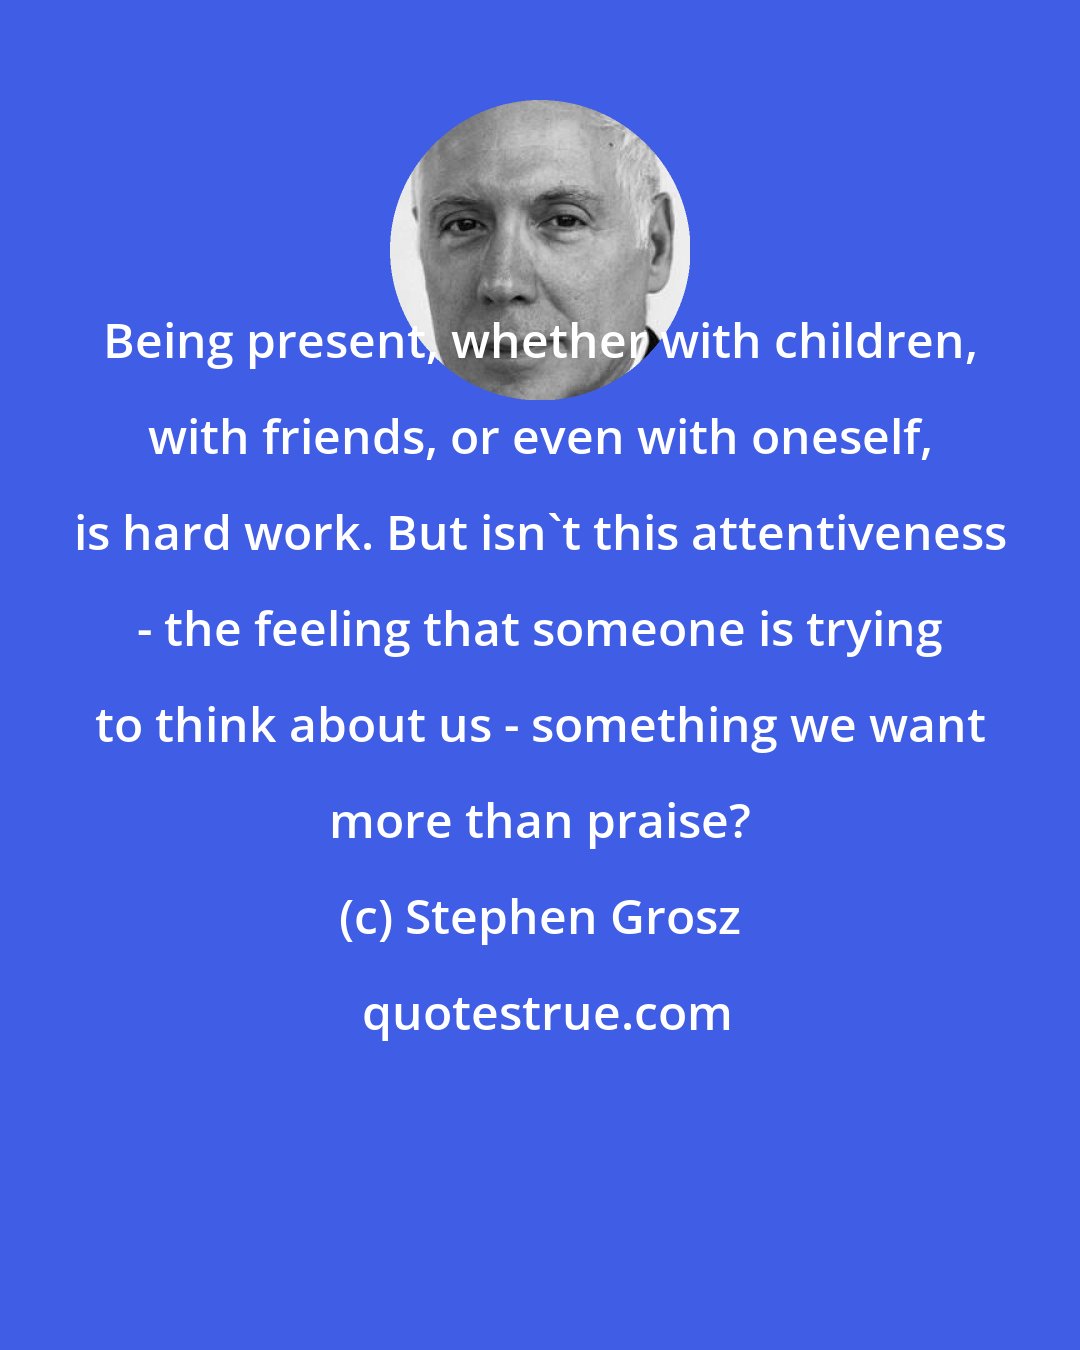 Stephen Grosz: Being present, whether with children, with friends, or even with oneself, is hard work. But isn't this attentiveness - the feeling that someone is trying to think about us - something we want more than praise?